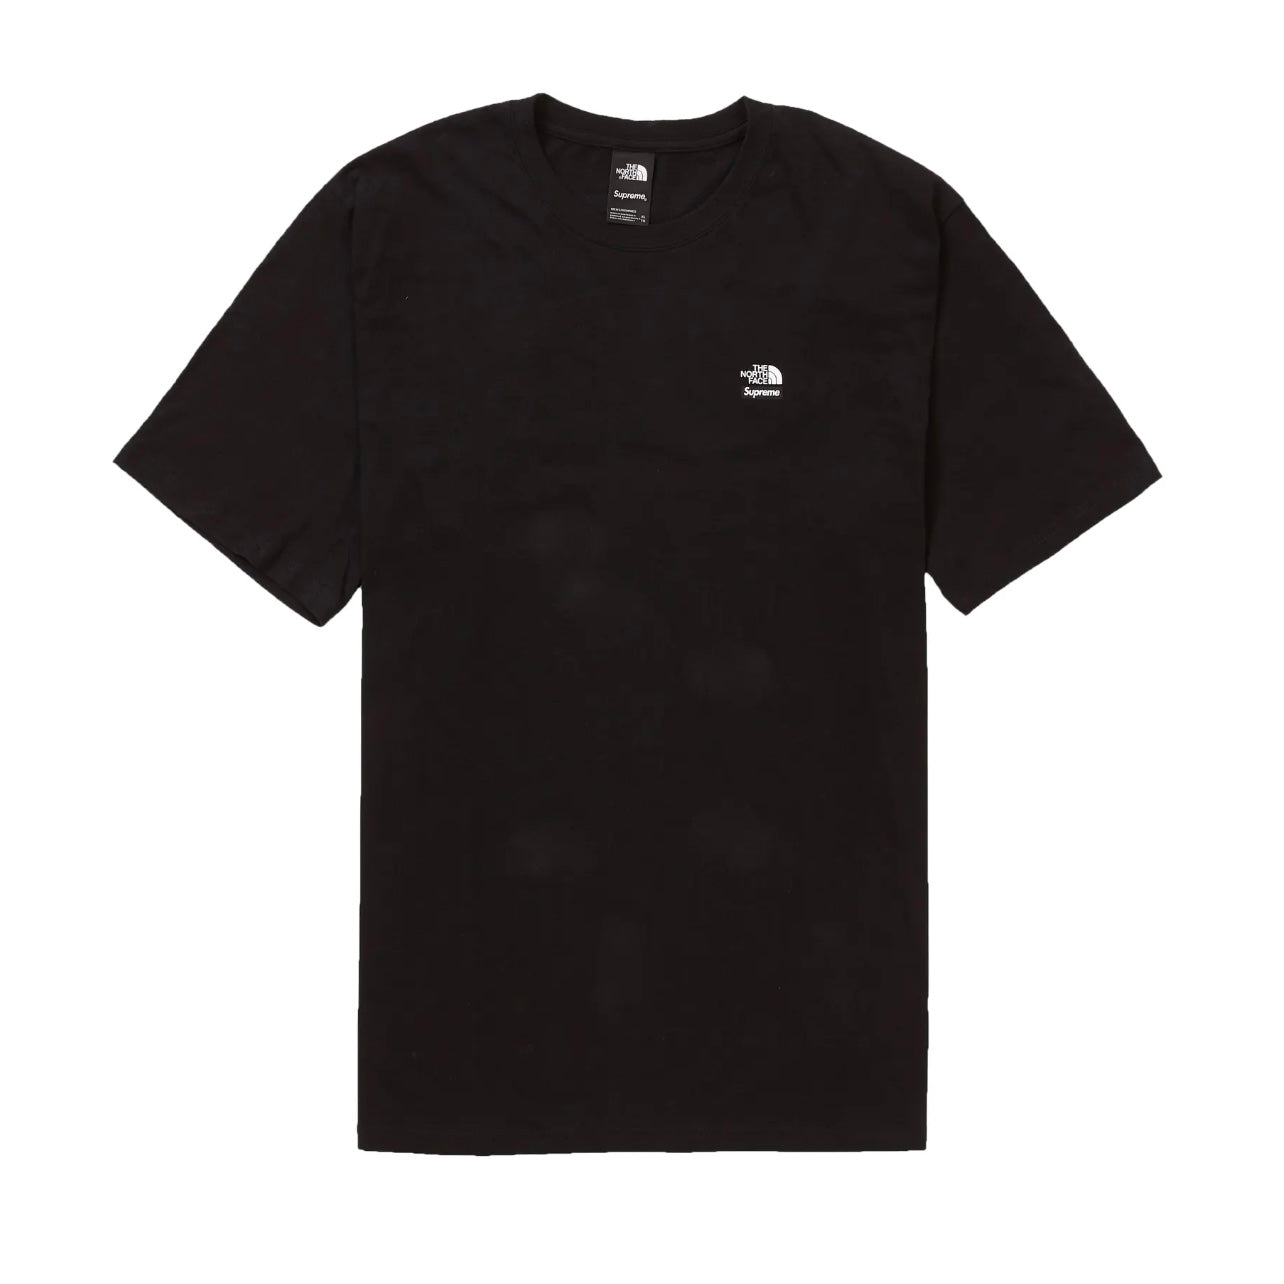 SUPREME X THE NORTH FACE MOUNTAINS TEE - BLACK